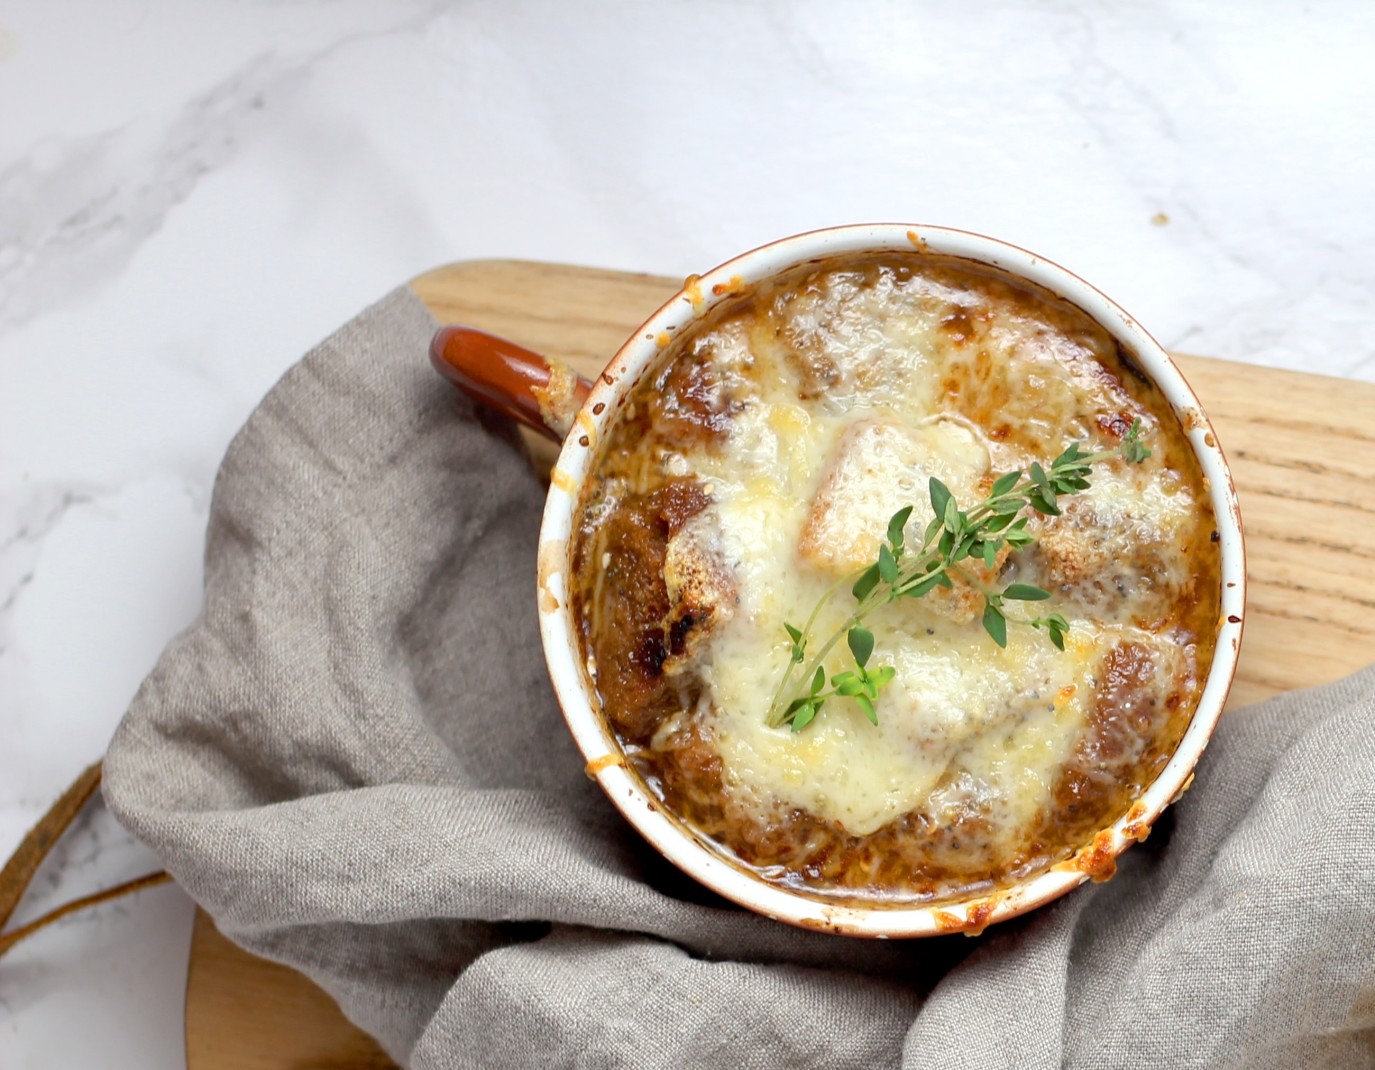 Hot onion soup in a mug topped with fresh herbs on a wooden cutting board